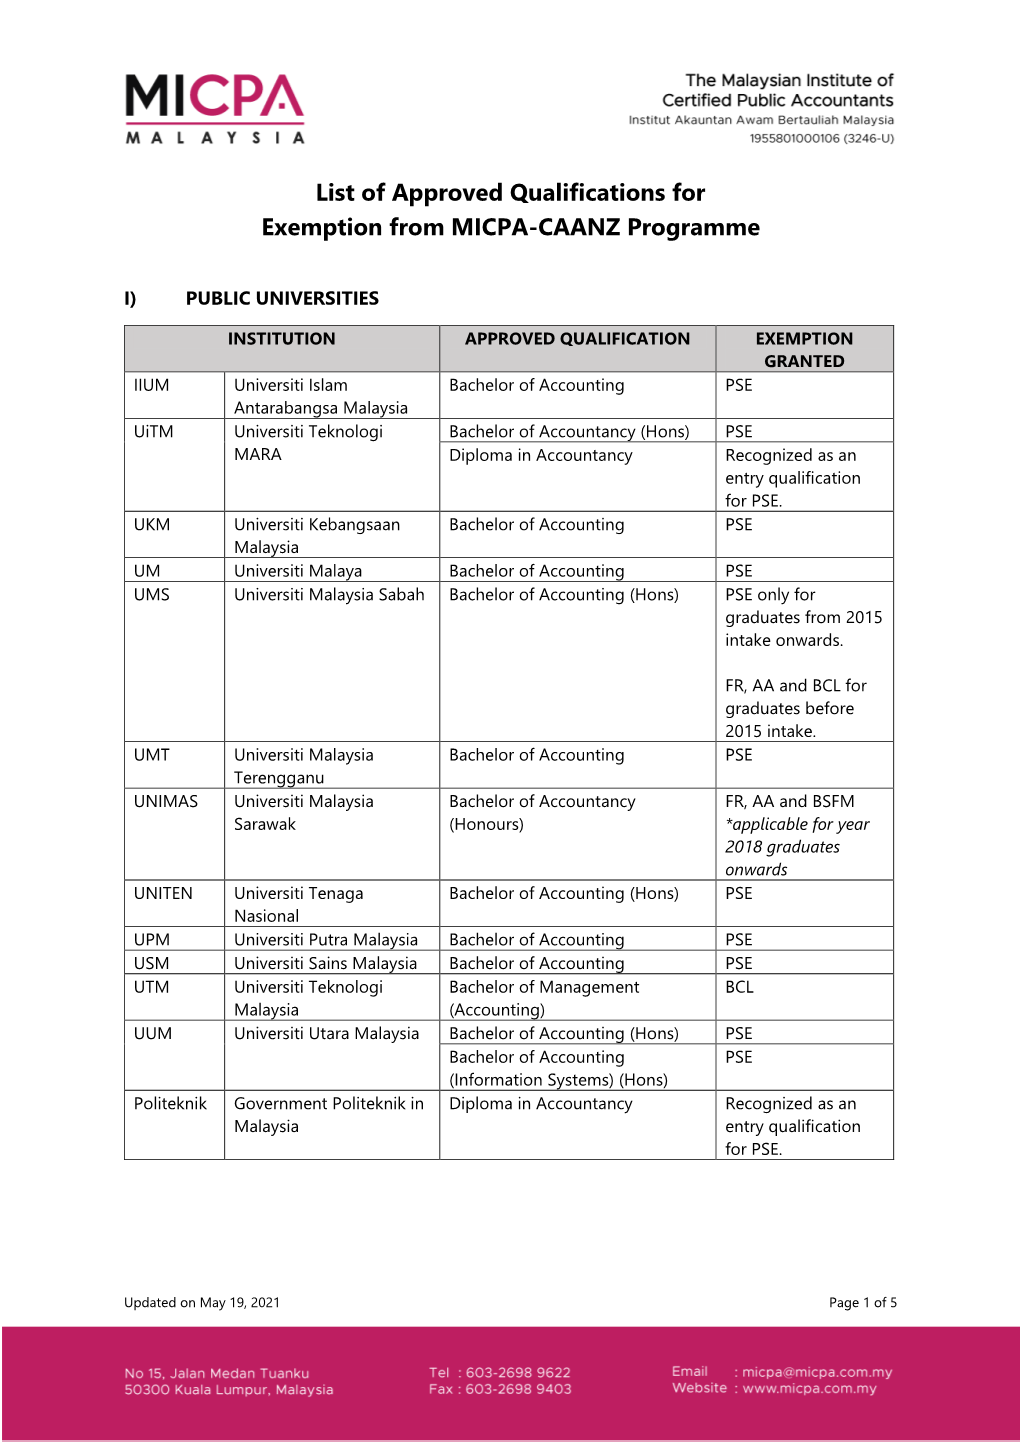 List of Approved Qualifications for Exemption from MICPA-CAANZ Programme